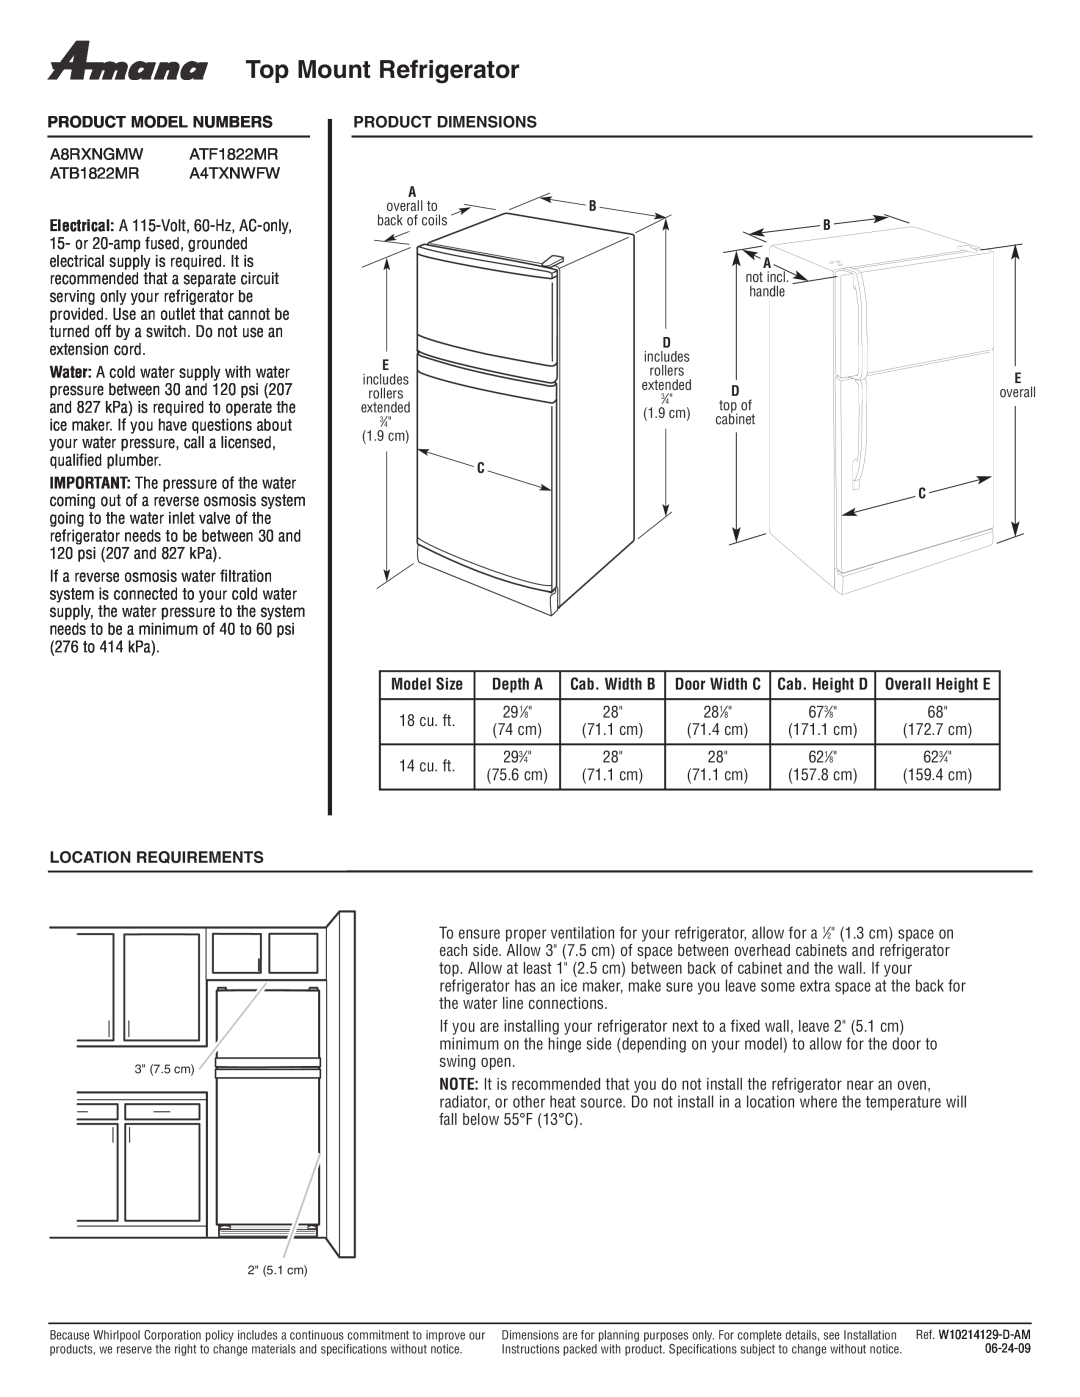 Amana A4TXNWFW dimensions Top Mount Refrigerator, Product Model Numbers, Product Dimensions, Model Size, Depth A 